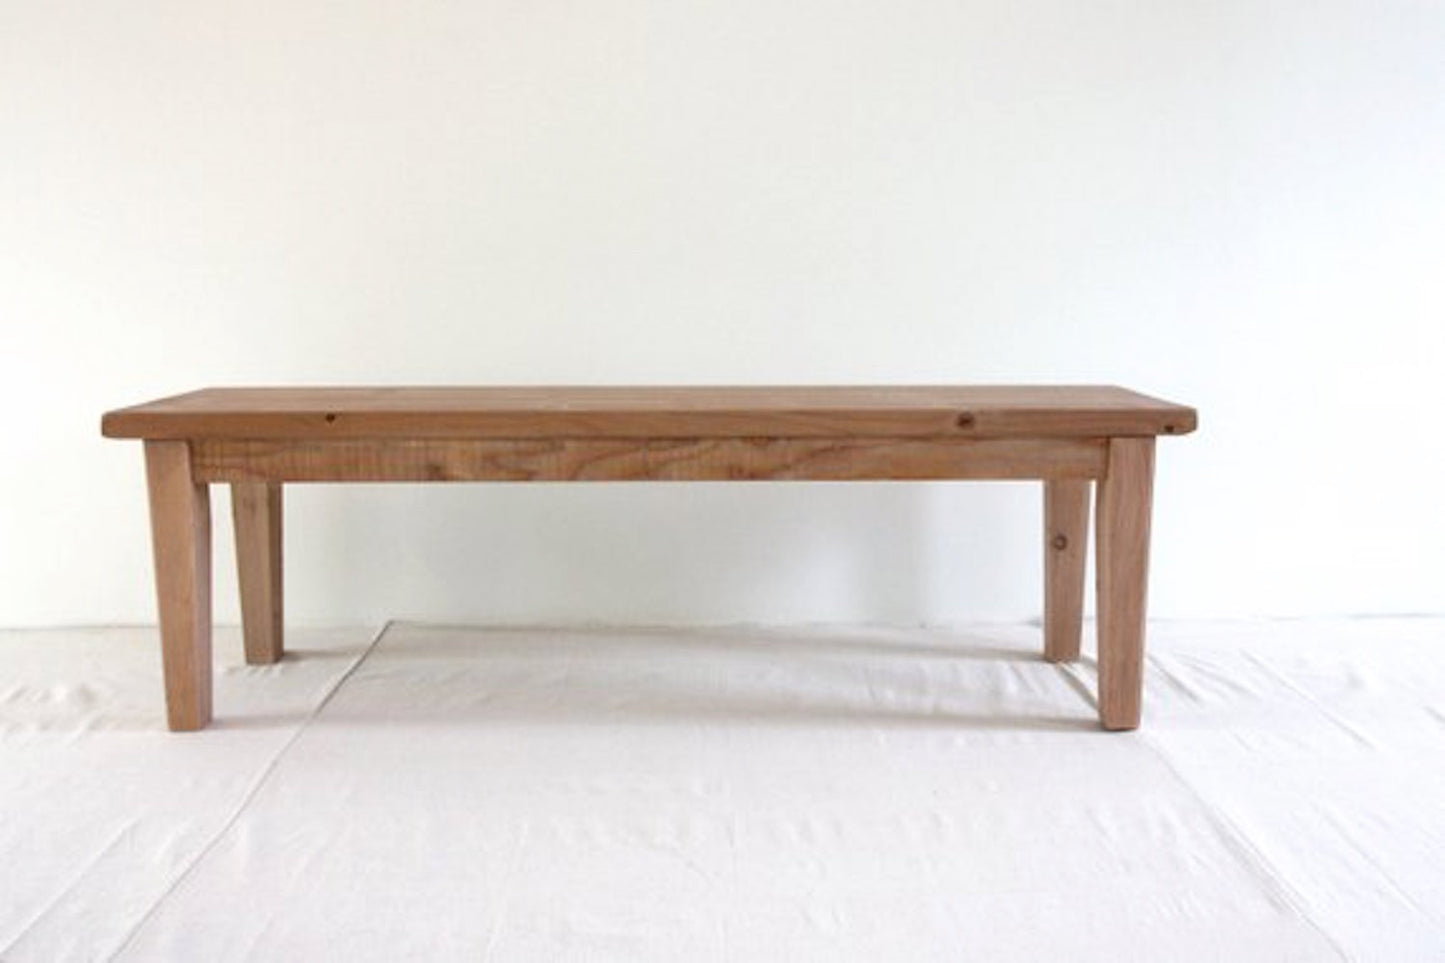 Rustic Wood Bench, Handmade, Traditional Style, North Field Store